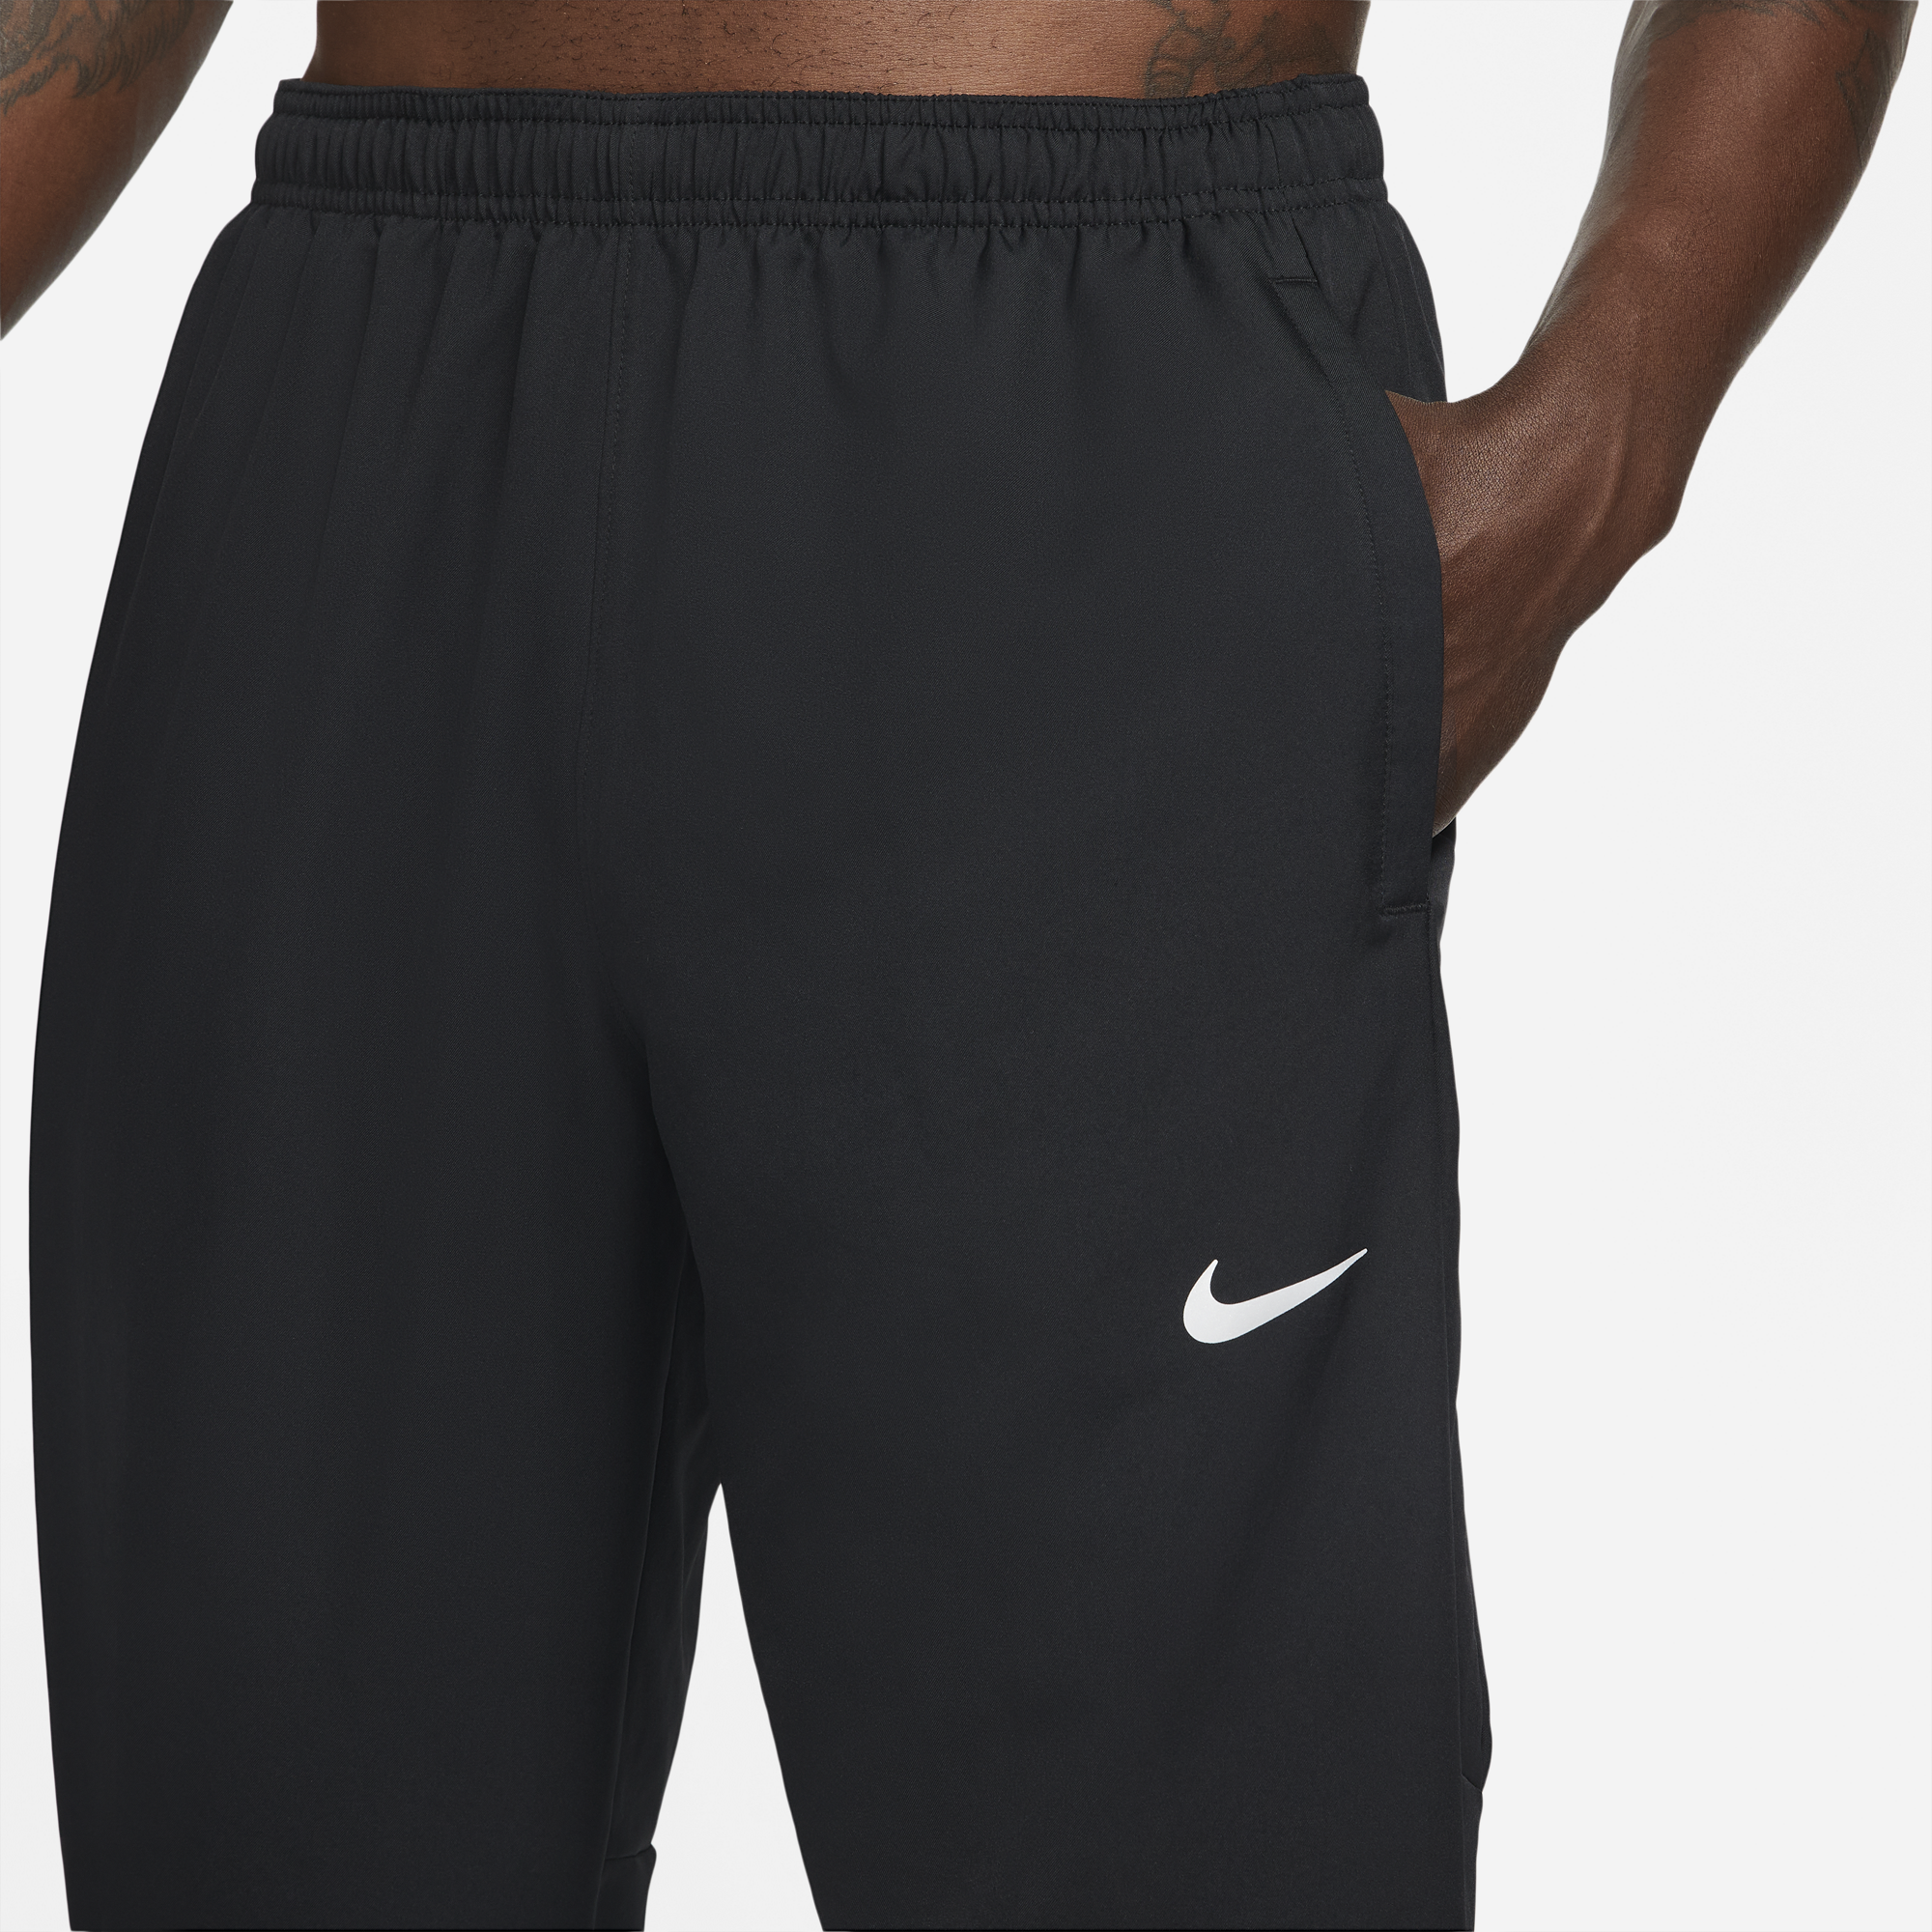 Nike Woven Pants New Age of Sports - Men's